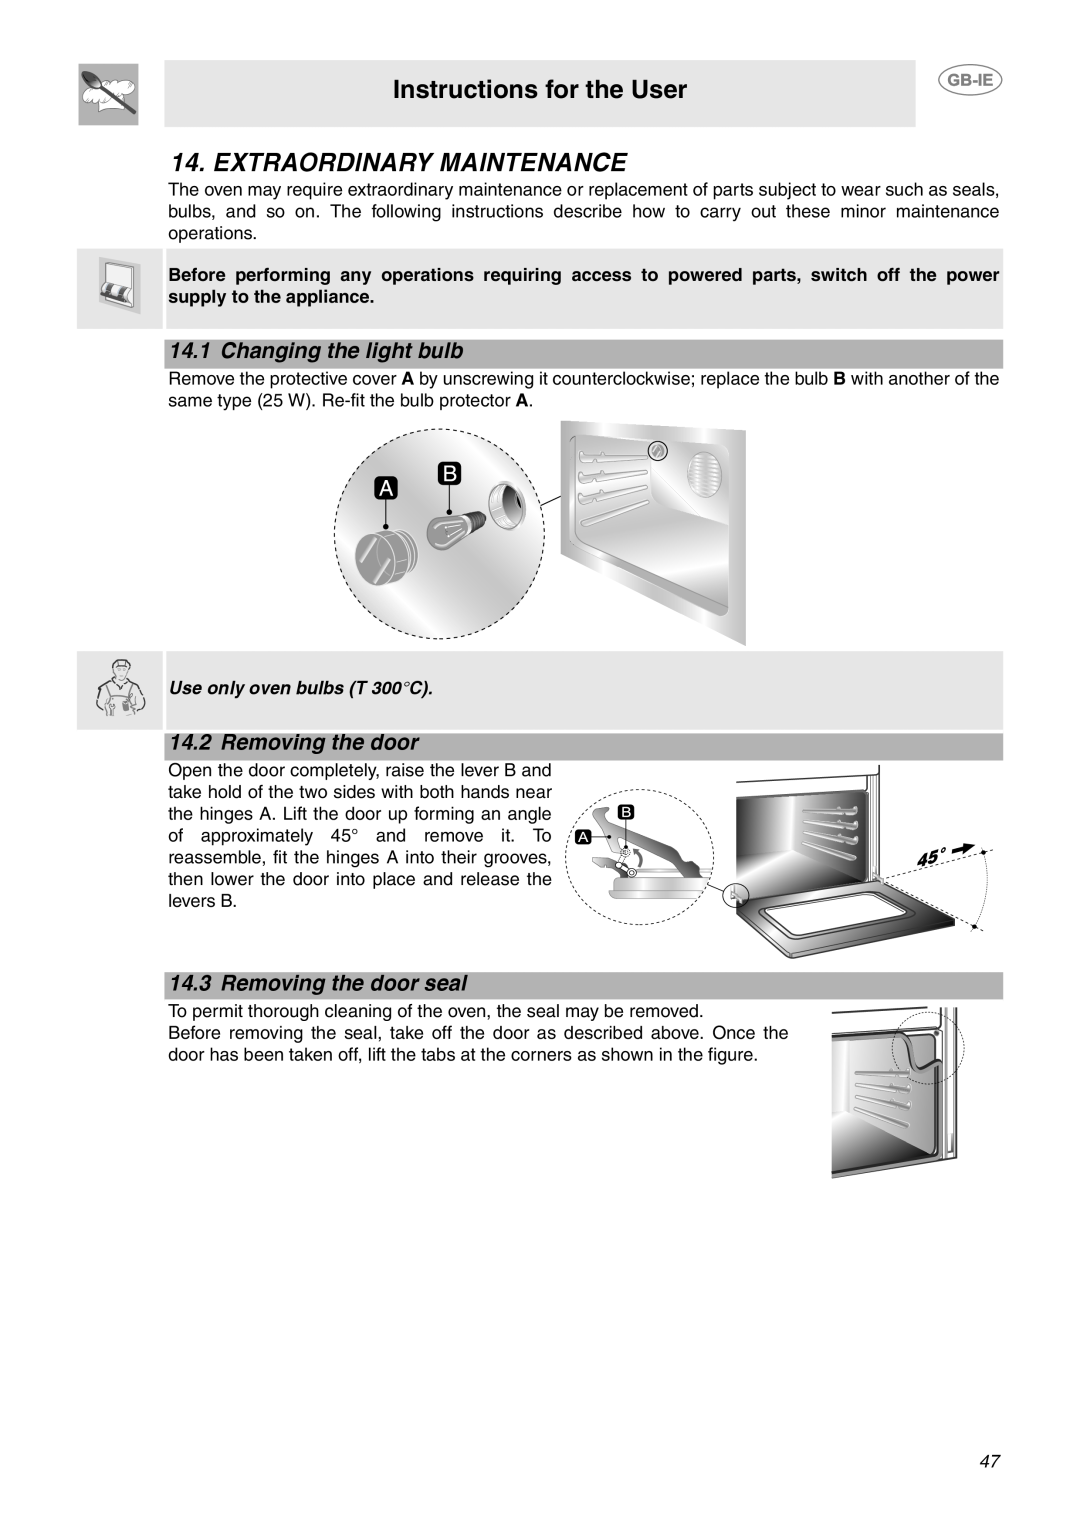 Smeg CE6CMX Extraordinary Maintenance, Changing the light bulb, Removing the door seal, Instructions for the User 